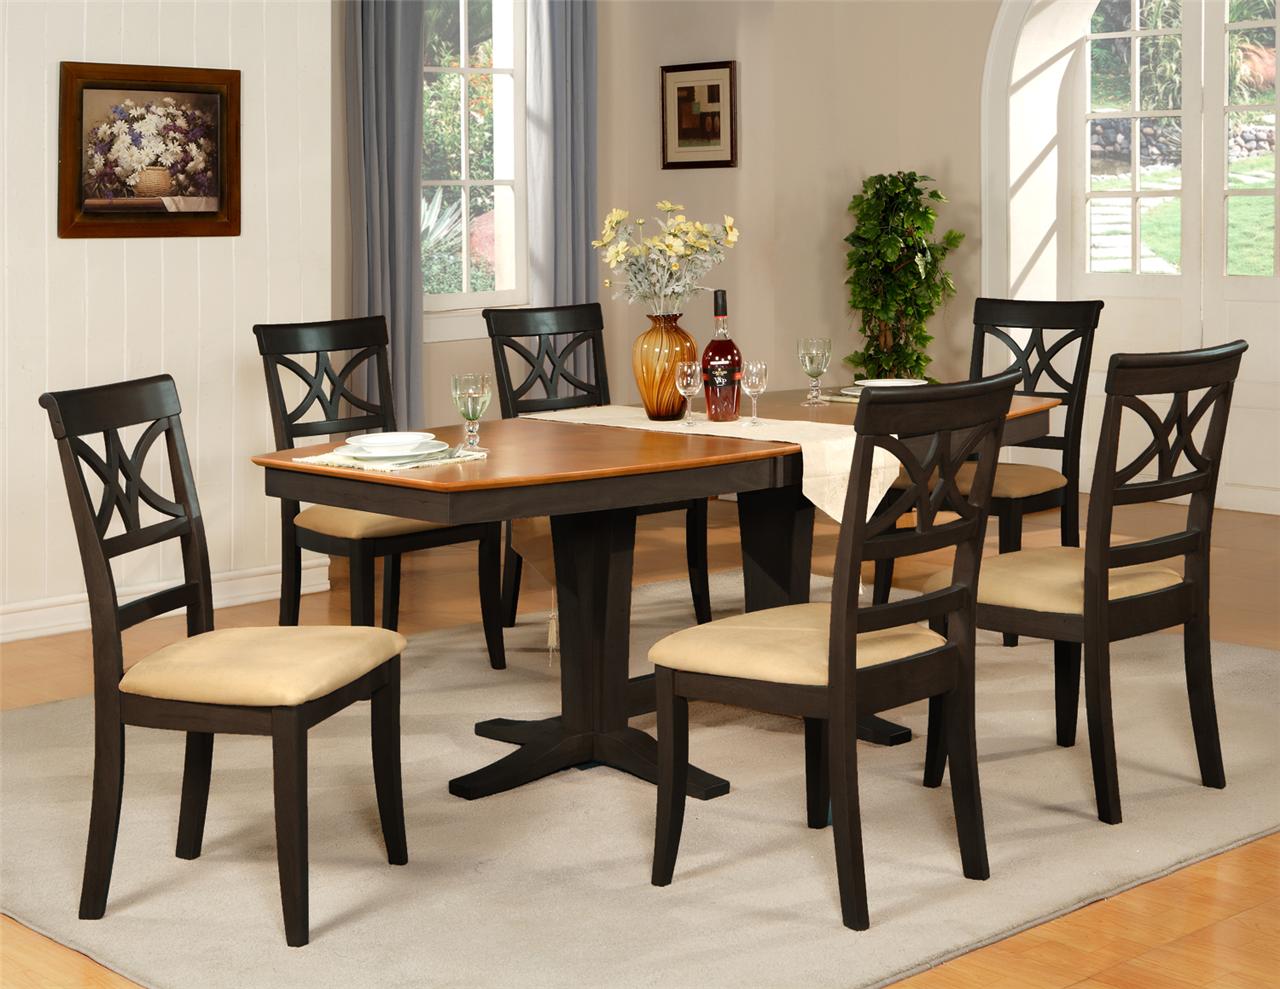 dining room furniture sets with terrific design for dining room interior  design YSAIBYC